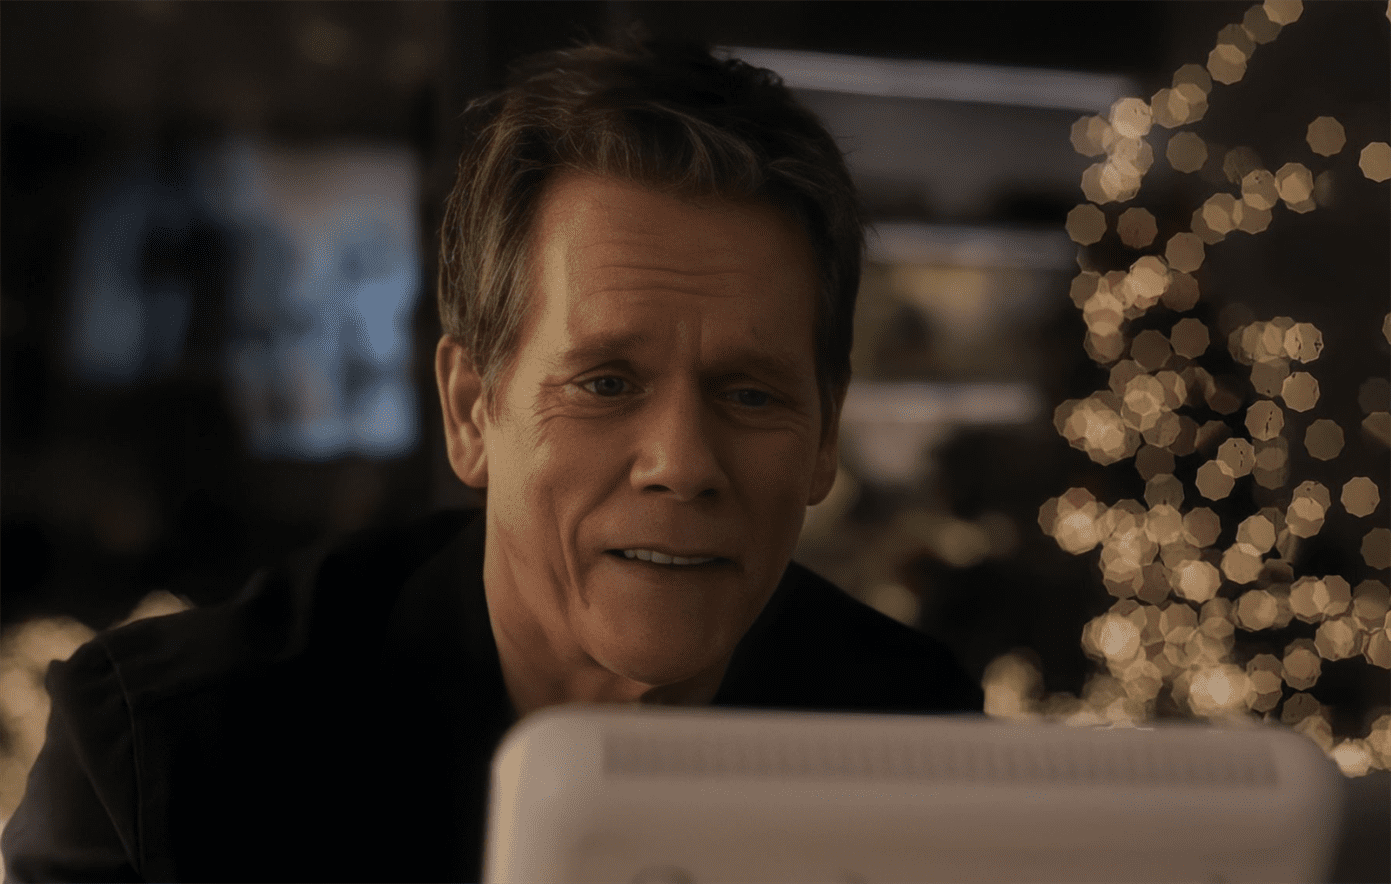 Kevin Bacon plays himself in the holiday special. Photo courtesy of Disney+